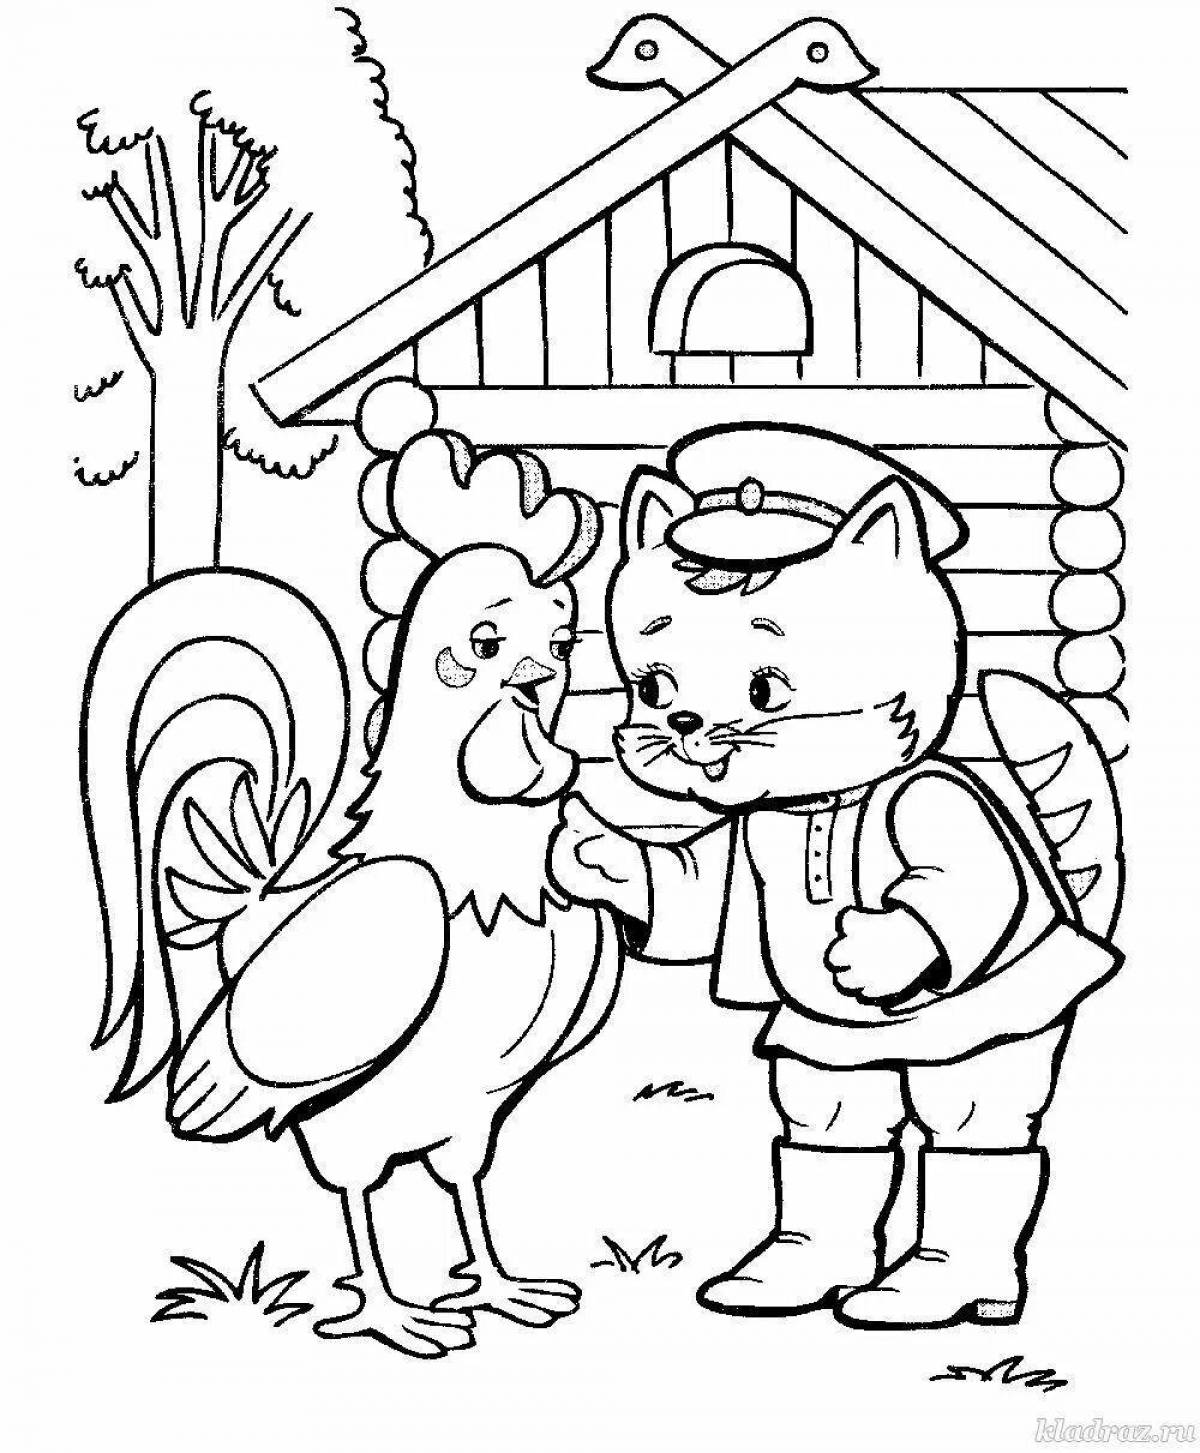 Coloring page cute cat and rooster